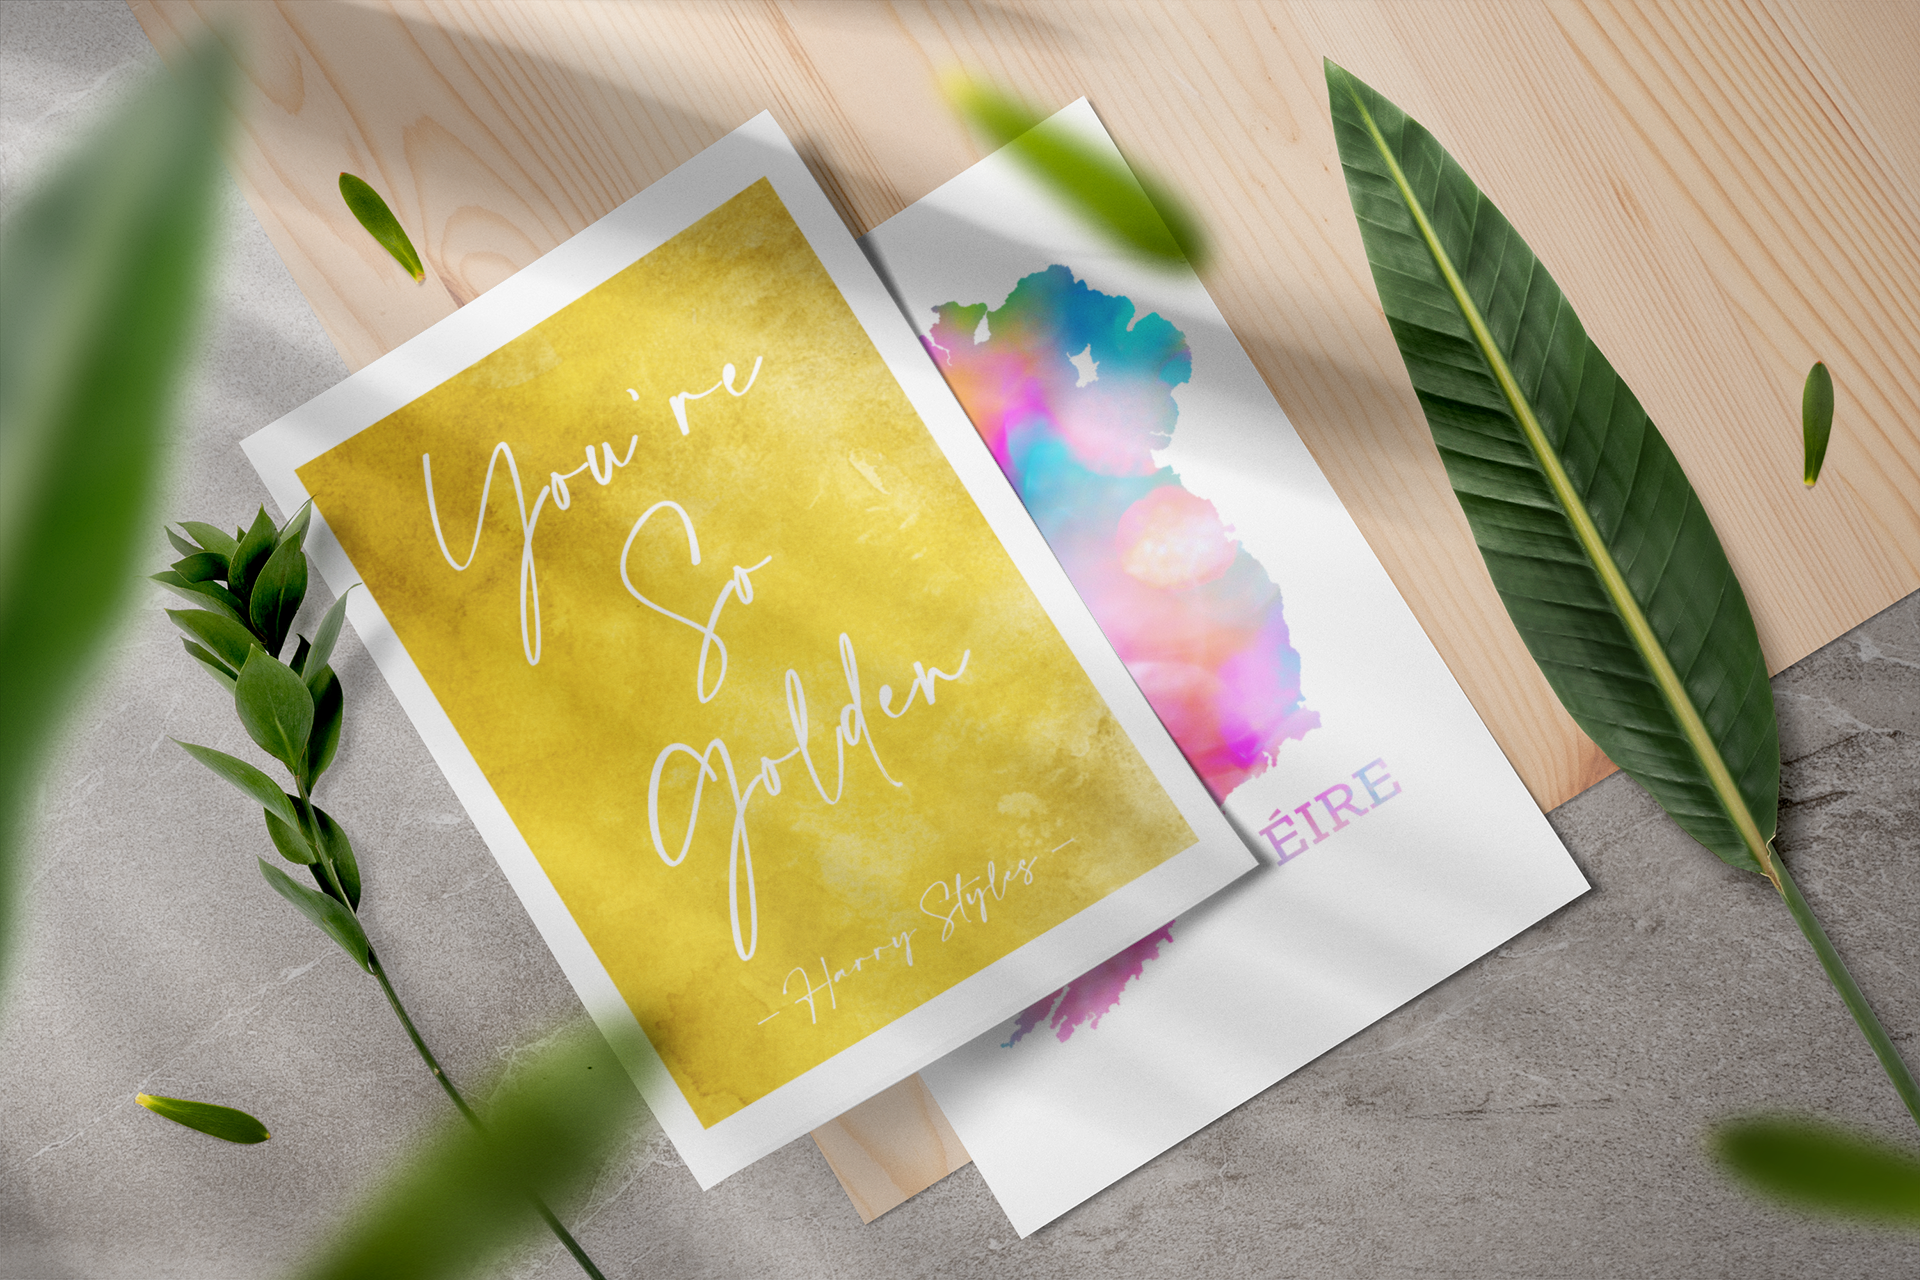 A4 / A3 -You're So Golden | Harry Styles Quote Print